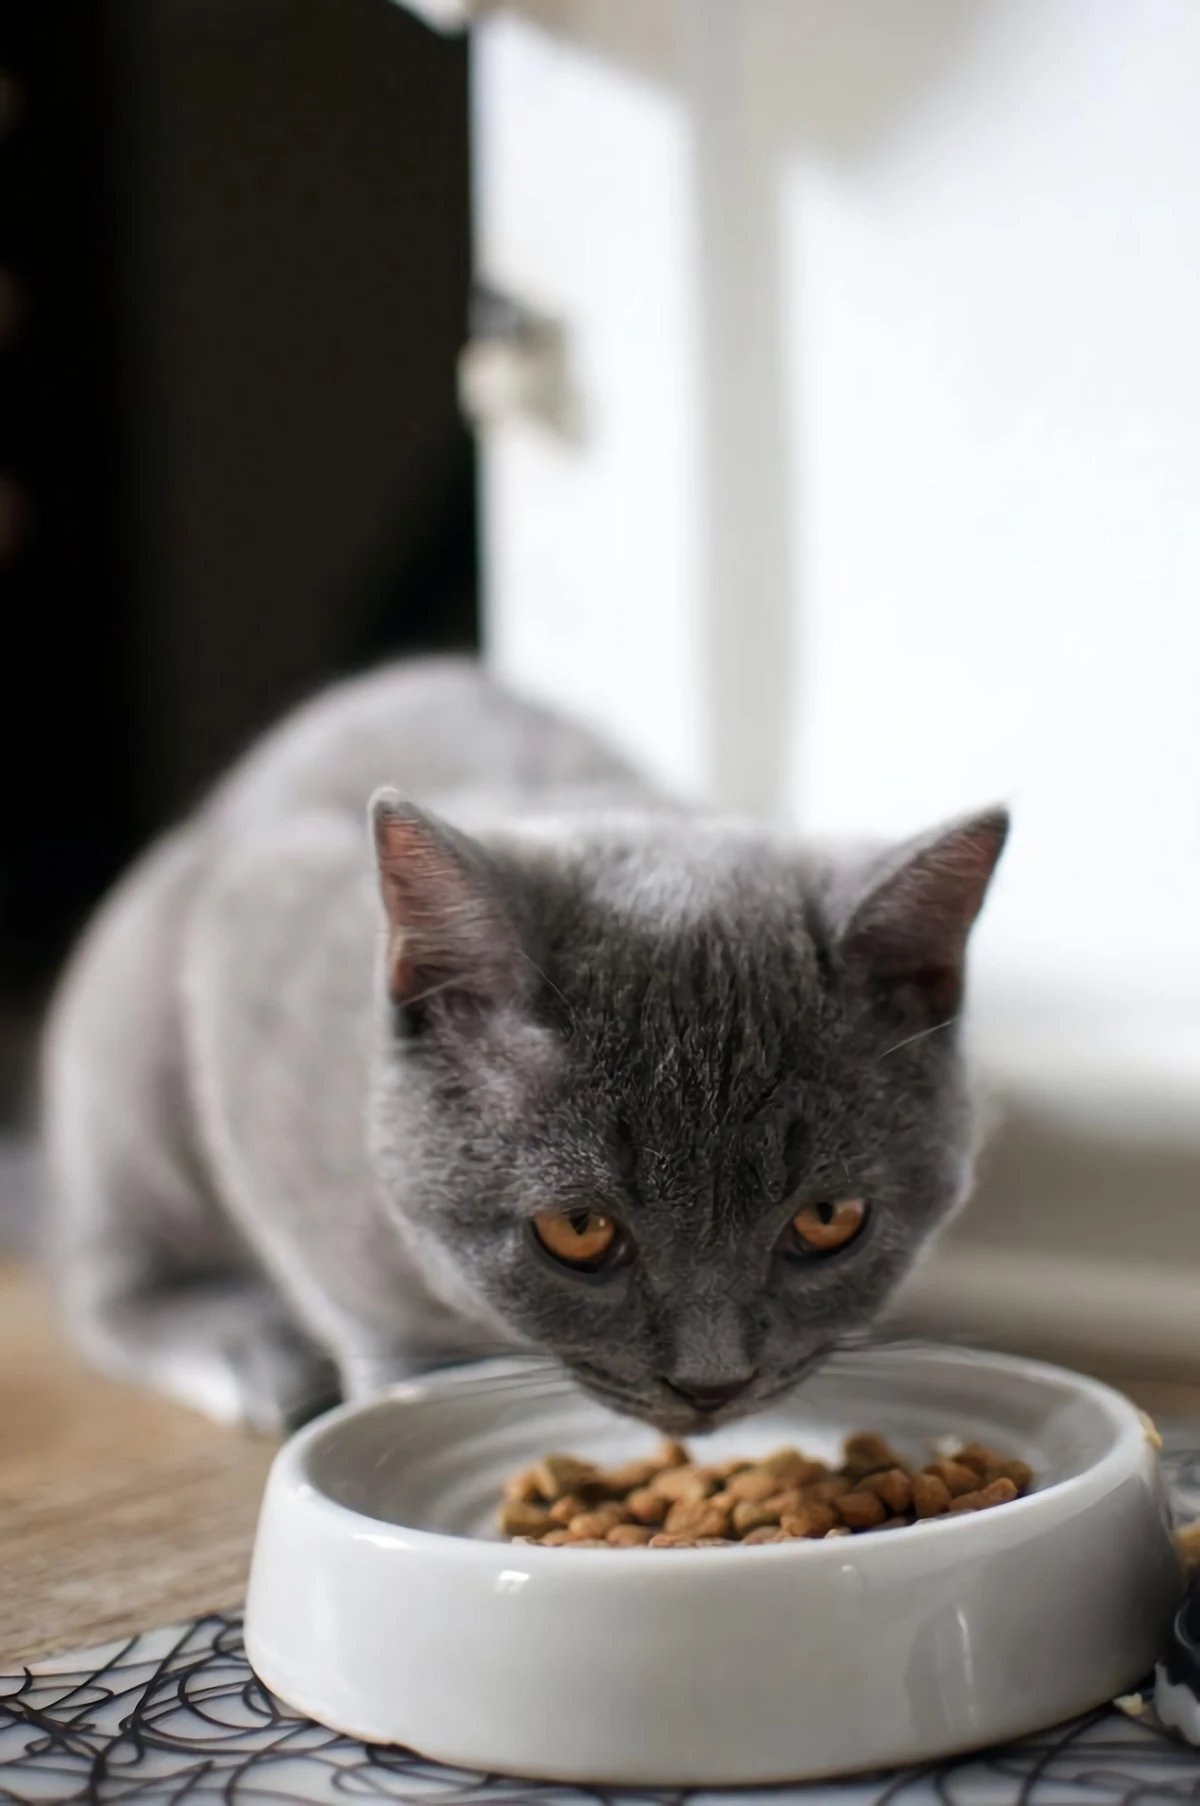 cat eating from a white bowl